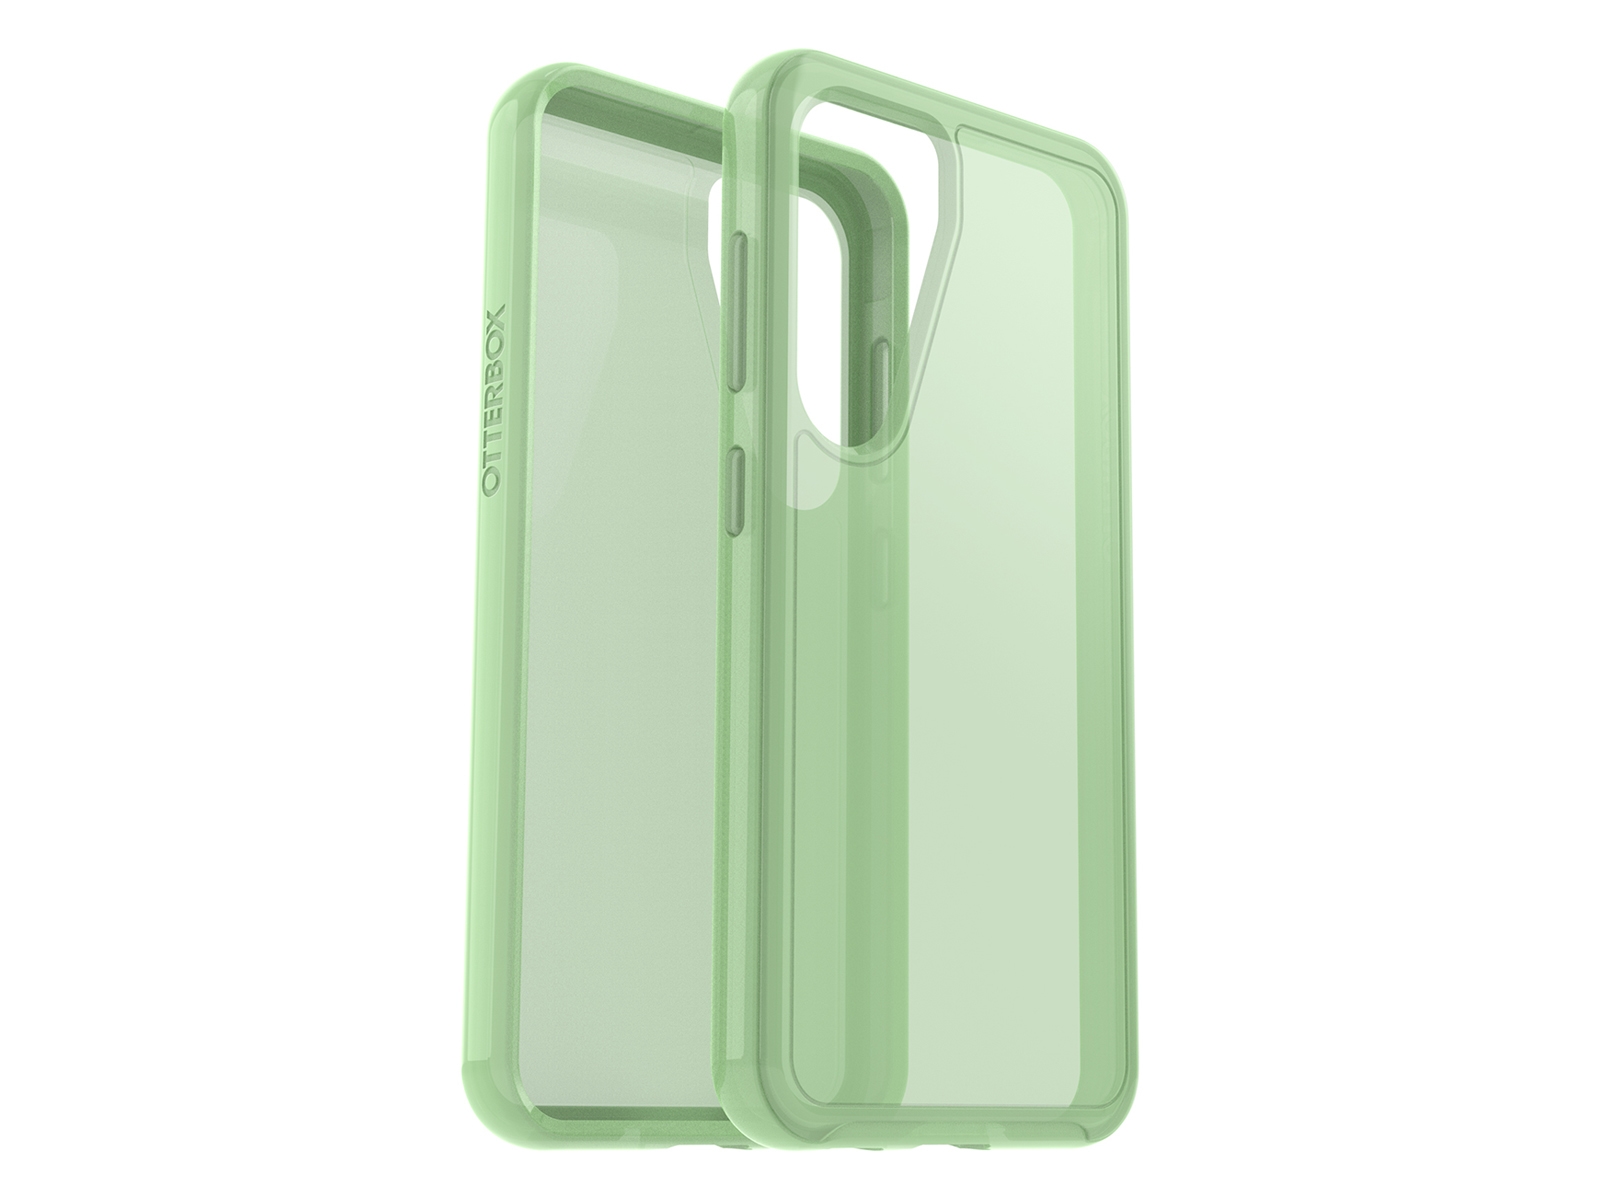 SamsungUS/home/mobile/mobile-accessories/pdp/phones/02132023/gallery-images/symmetry_clear/dm1/DM1-Green.jpg